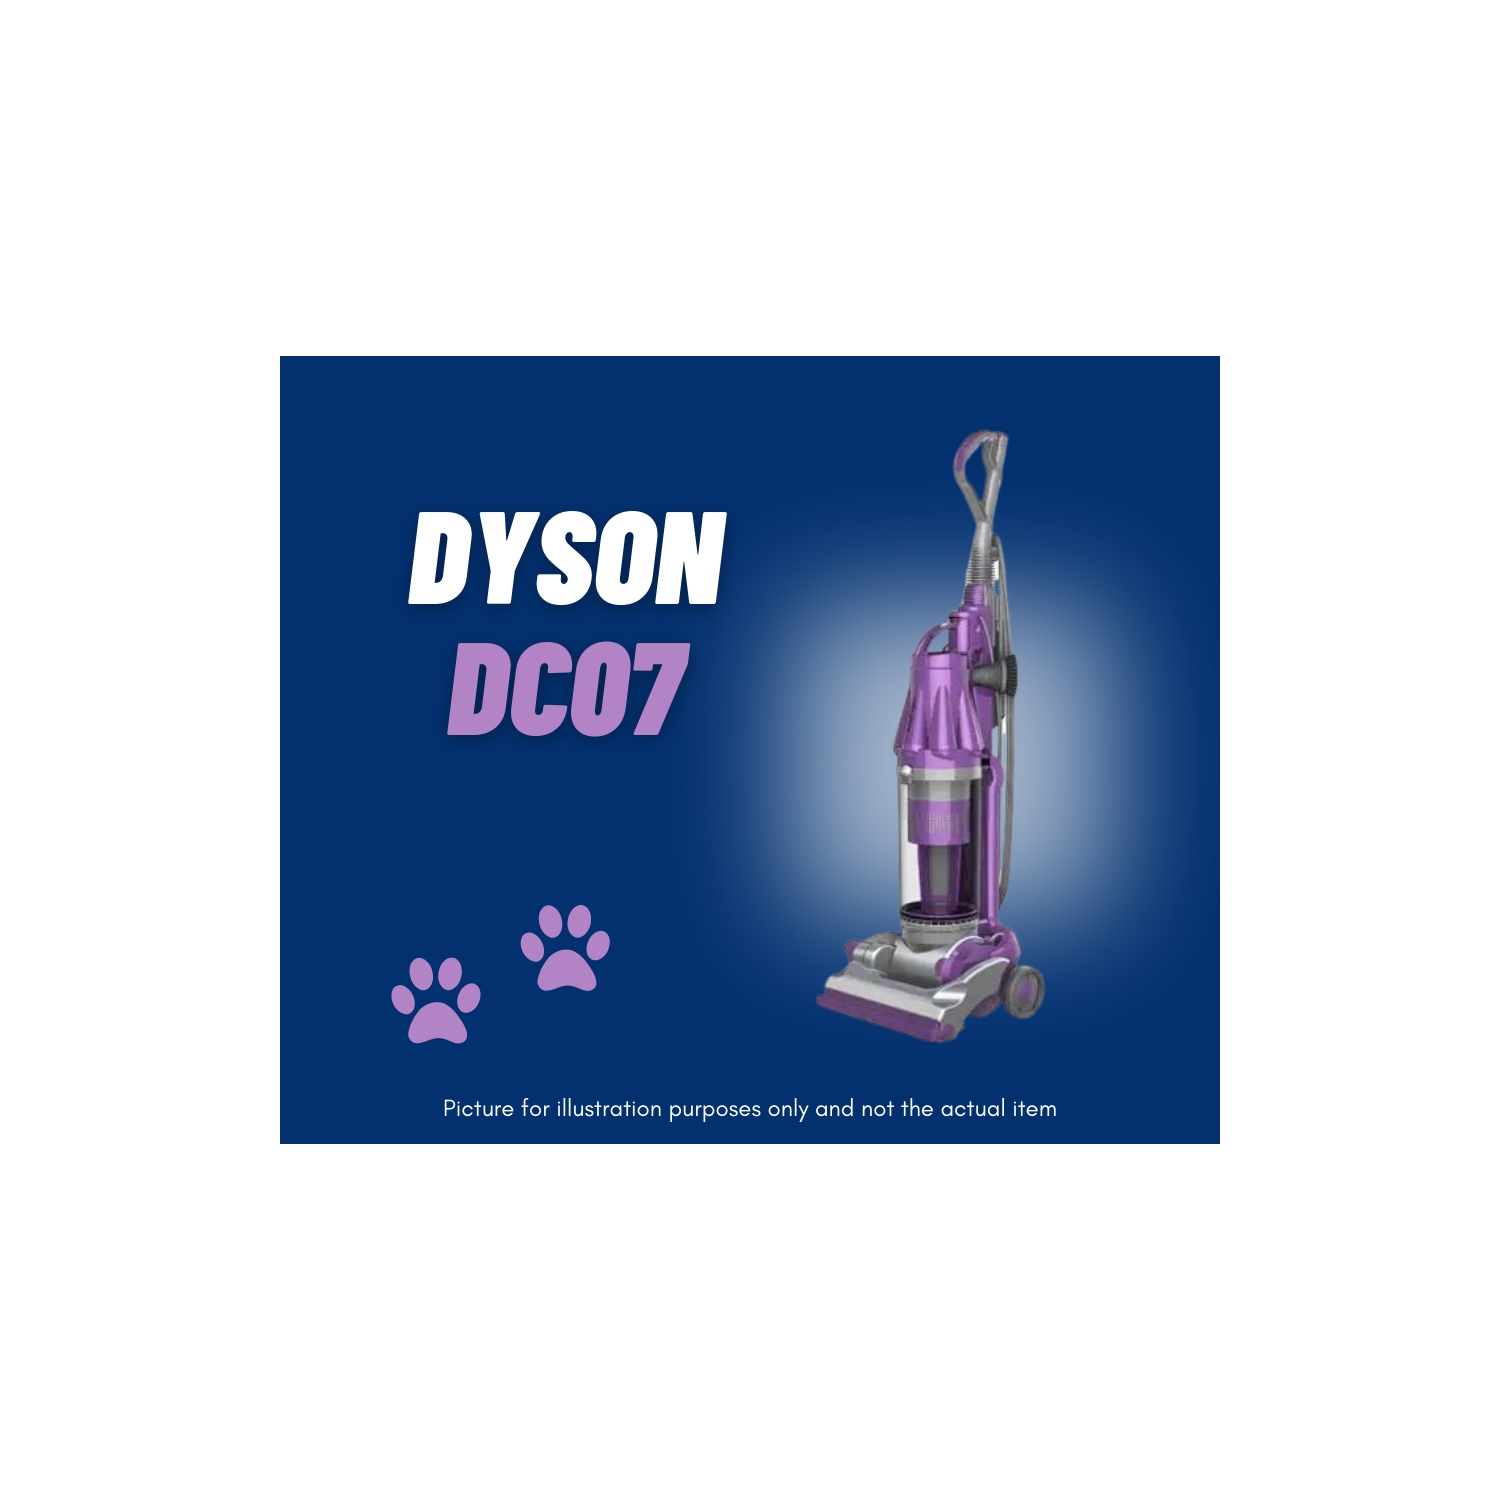 Reconditioned Dyson DC07 Animal Vacuum Cleaner - Fivestar Services -  Euronics